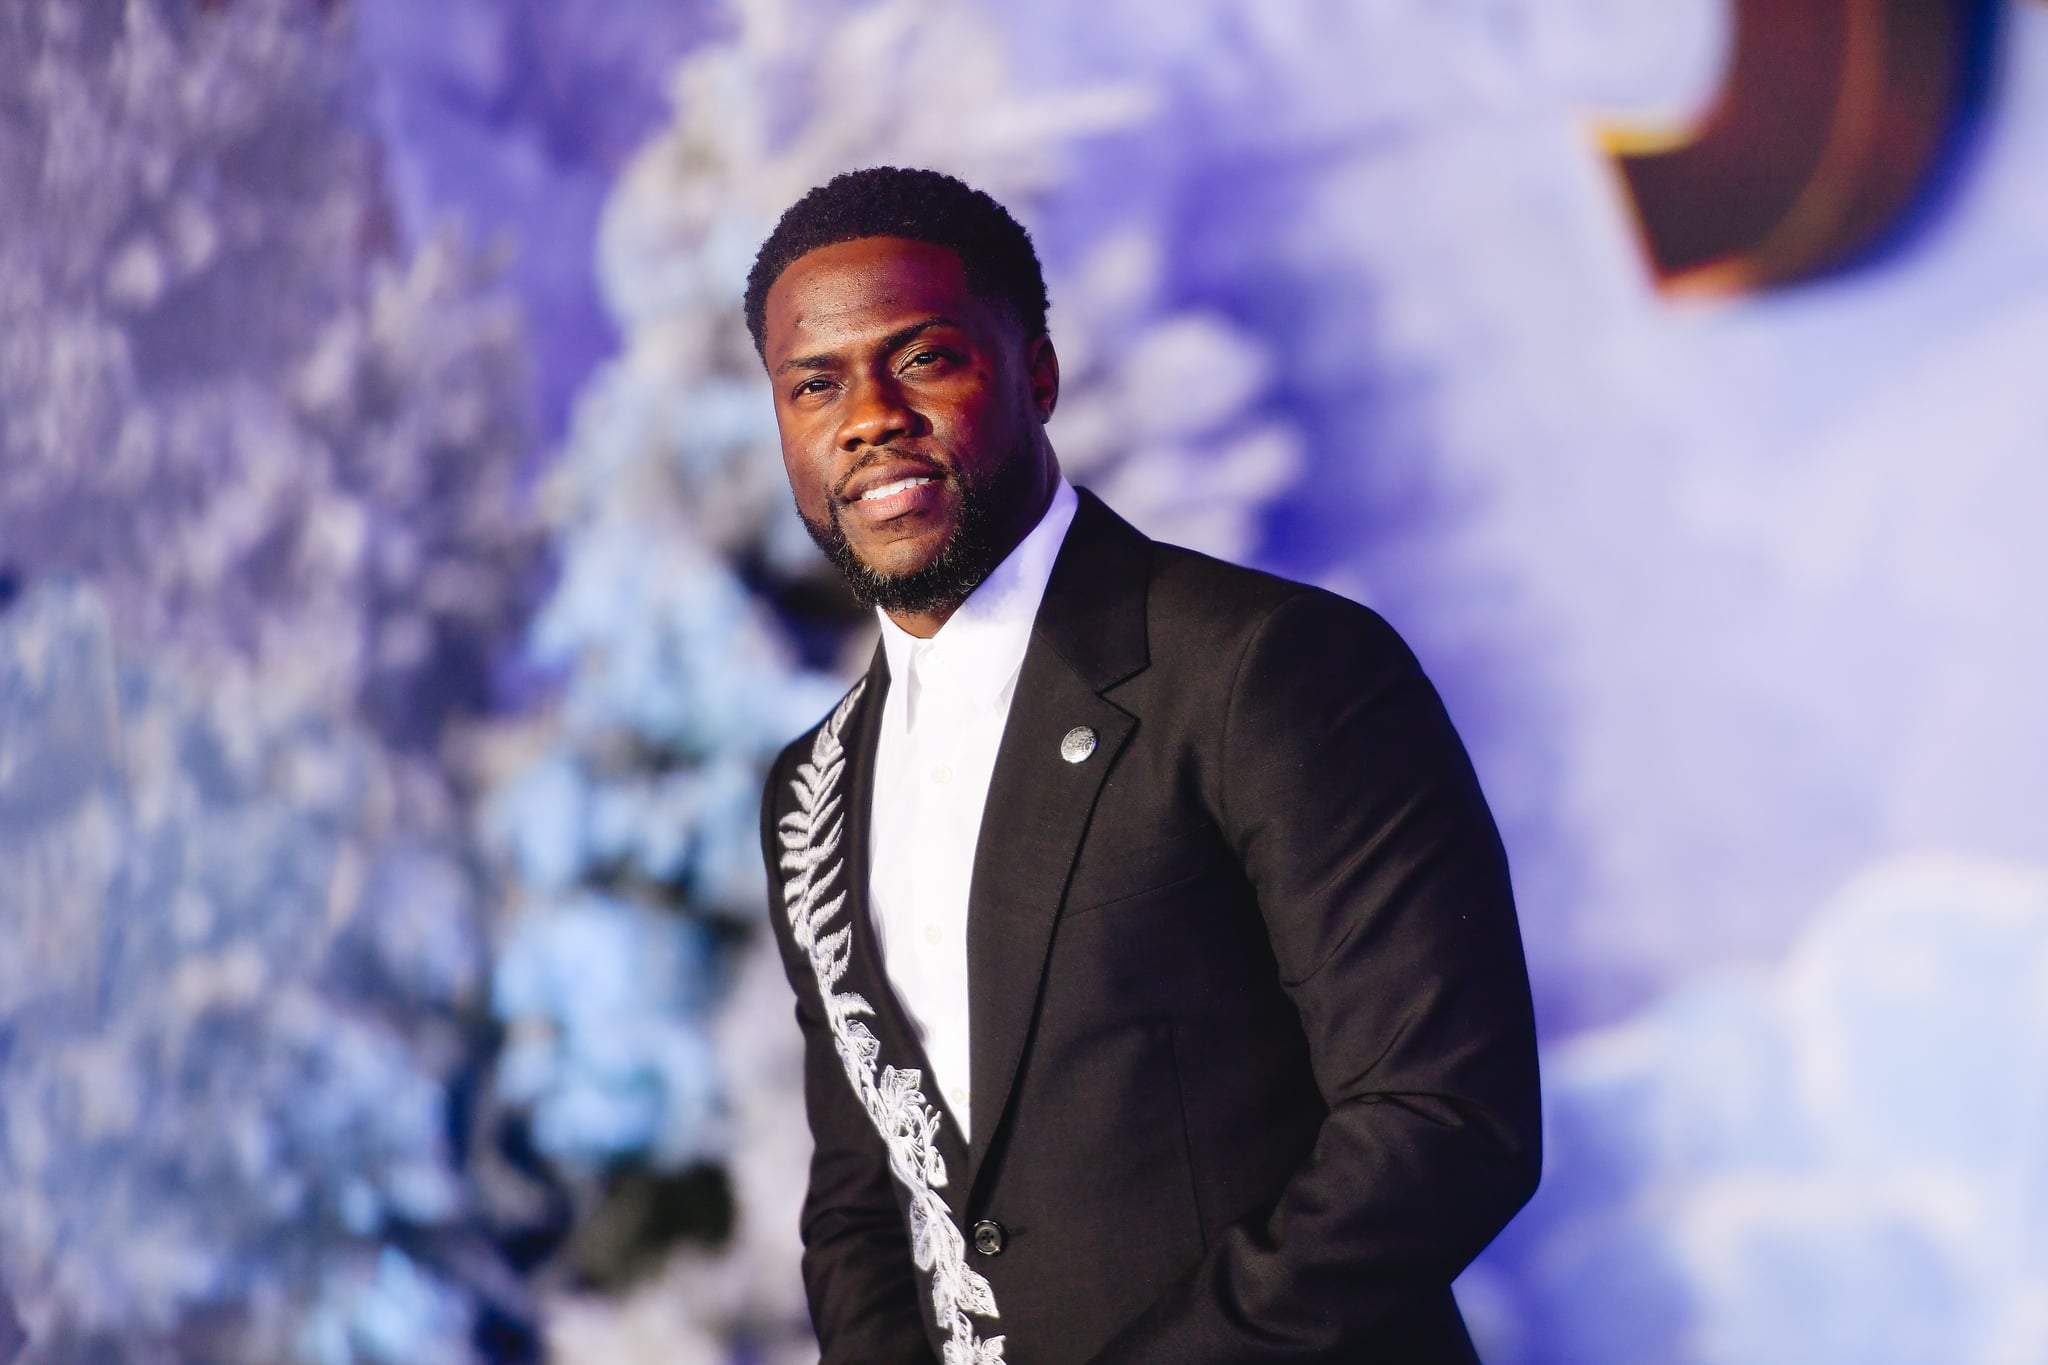 HOLLYWOOD, CALIFORNIA - DECEMBER 09: Kevin Hart attends the premiere of Sony Pictures' 